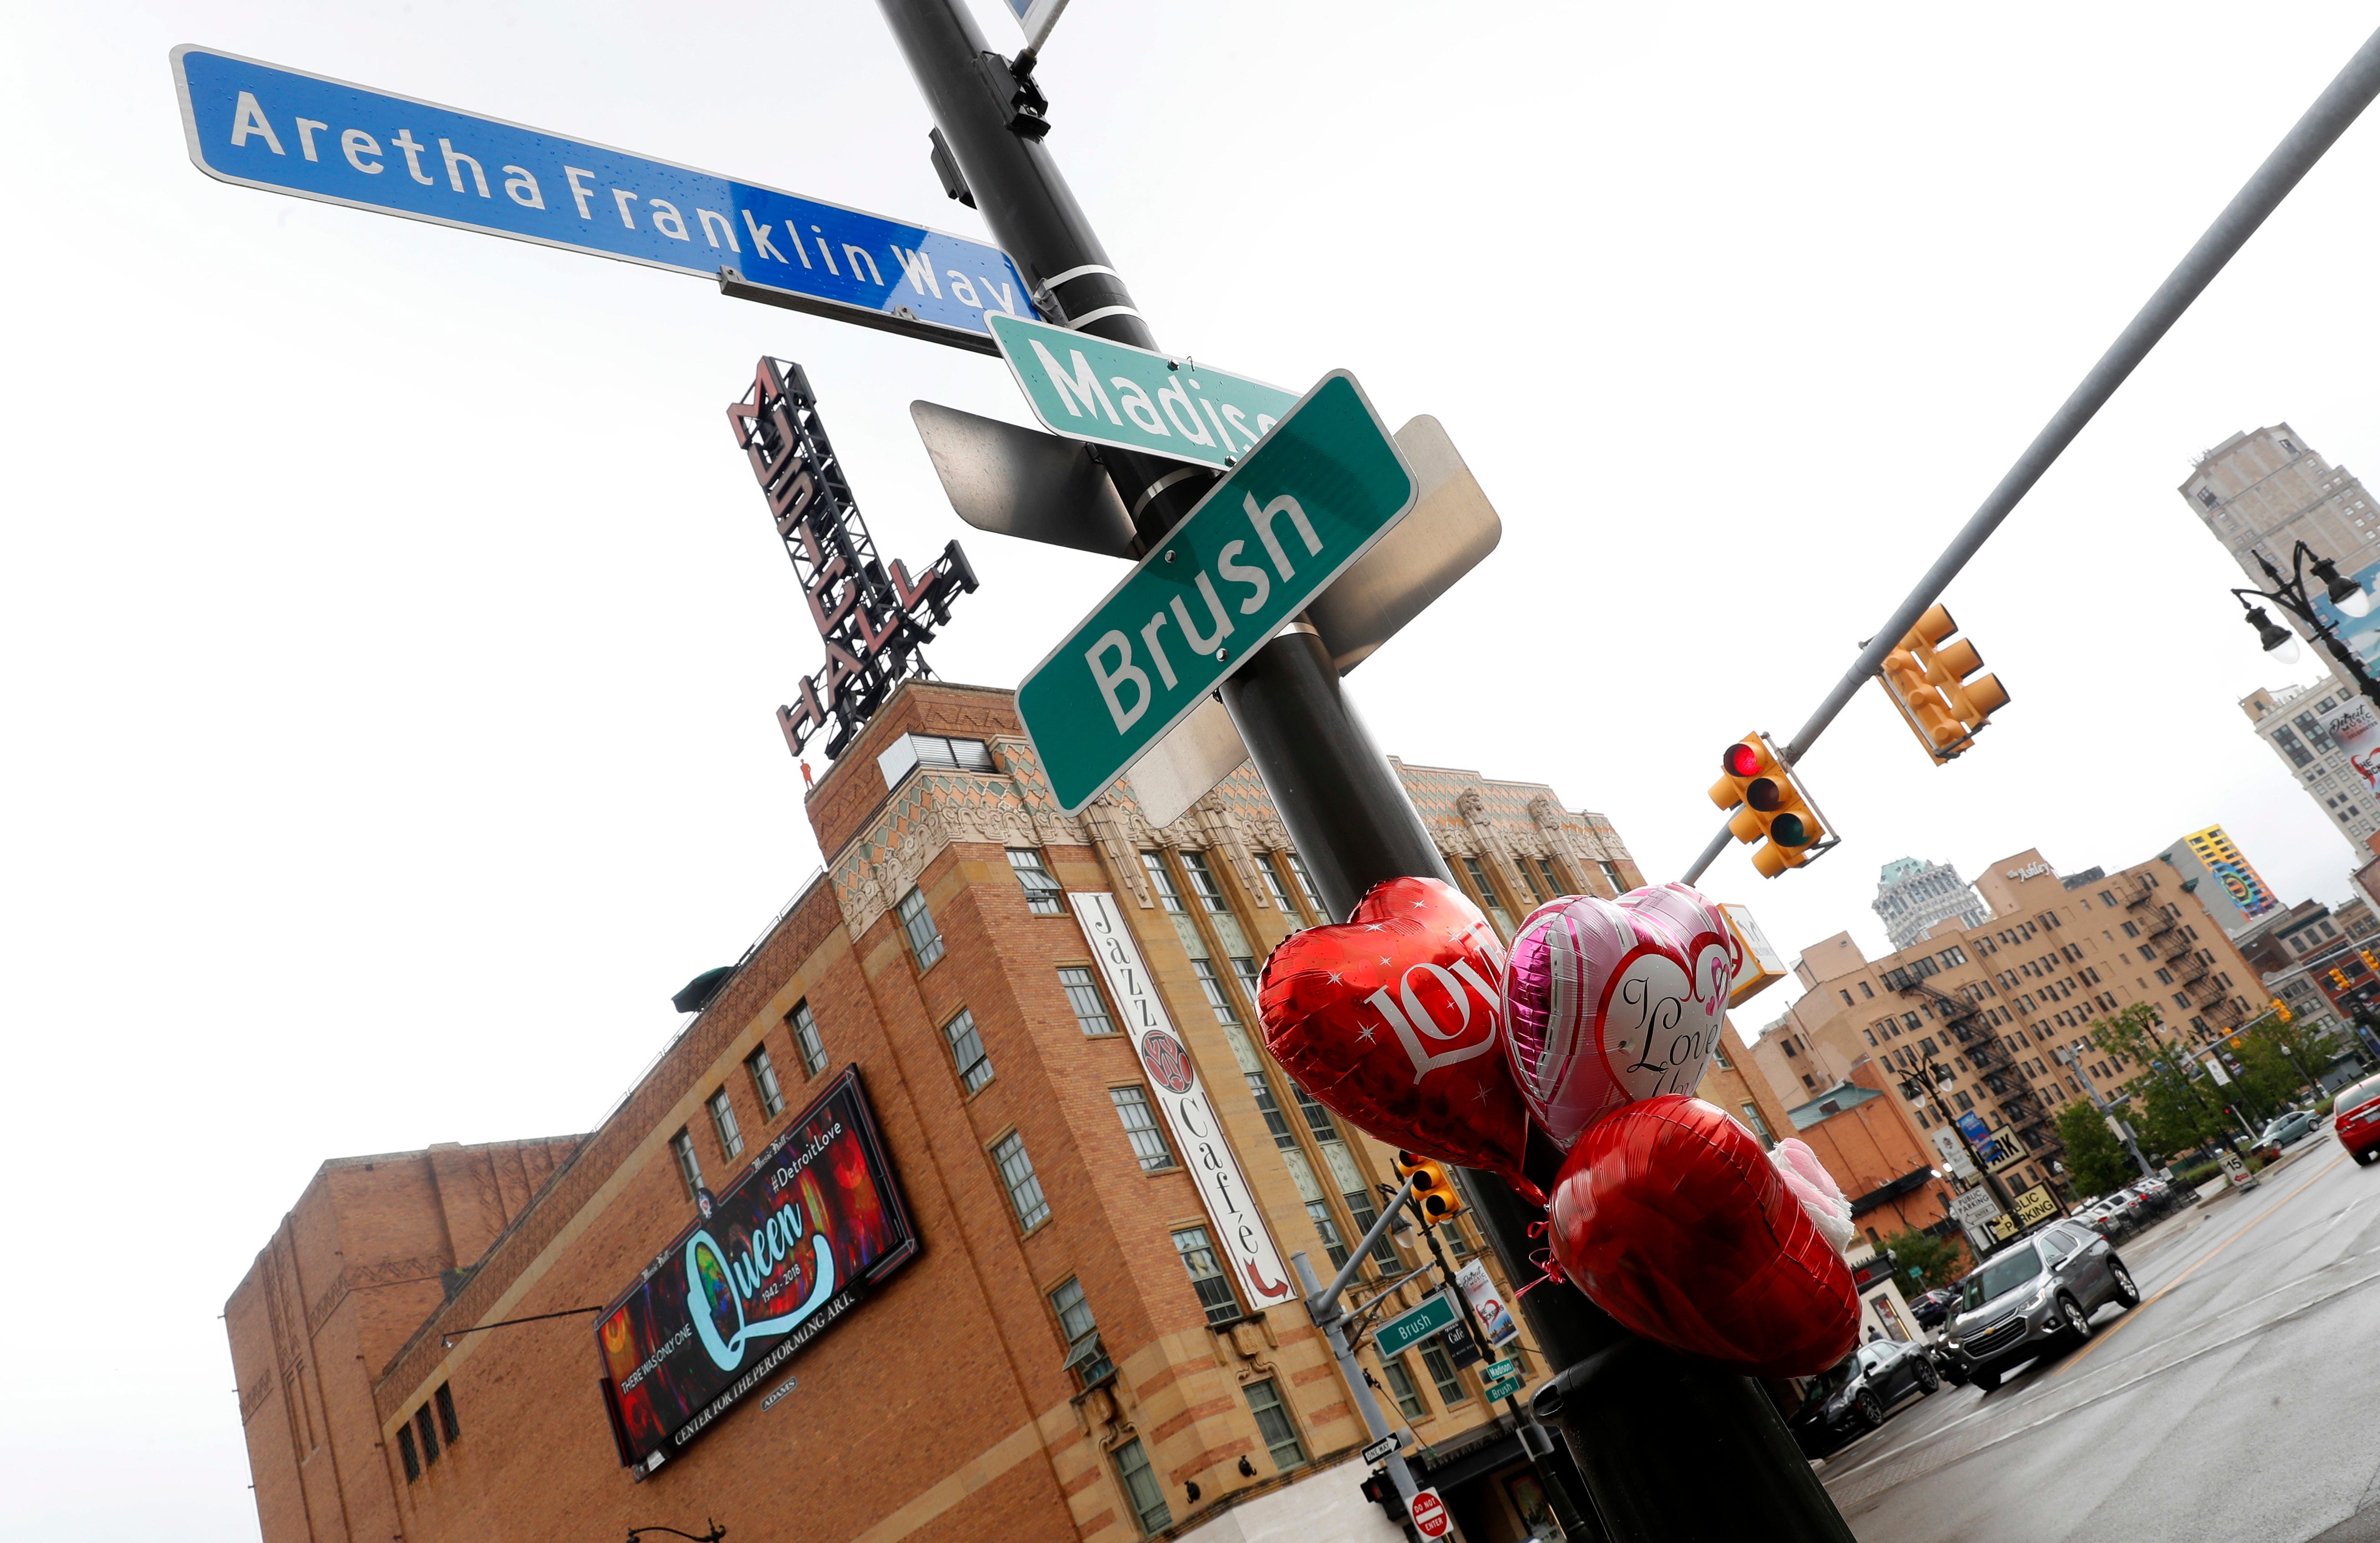 Balloons hang in Aretha Franklin's honor on a street post at Aretha Franklin Way in Detroit, Thursday.